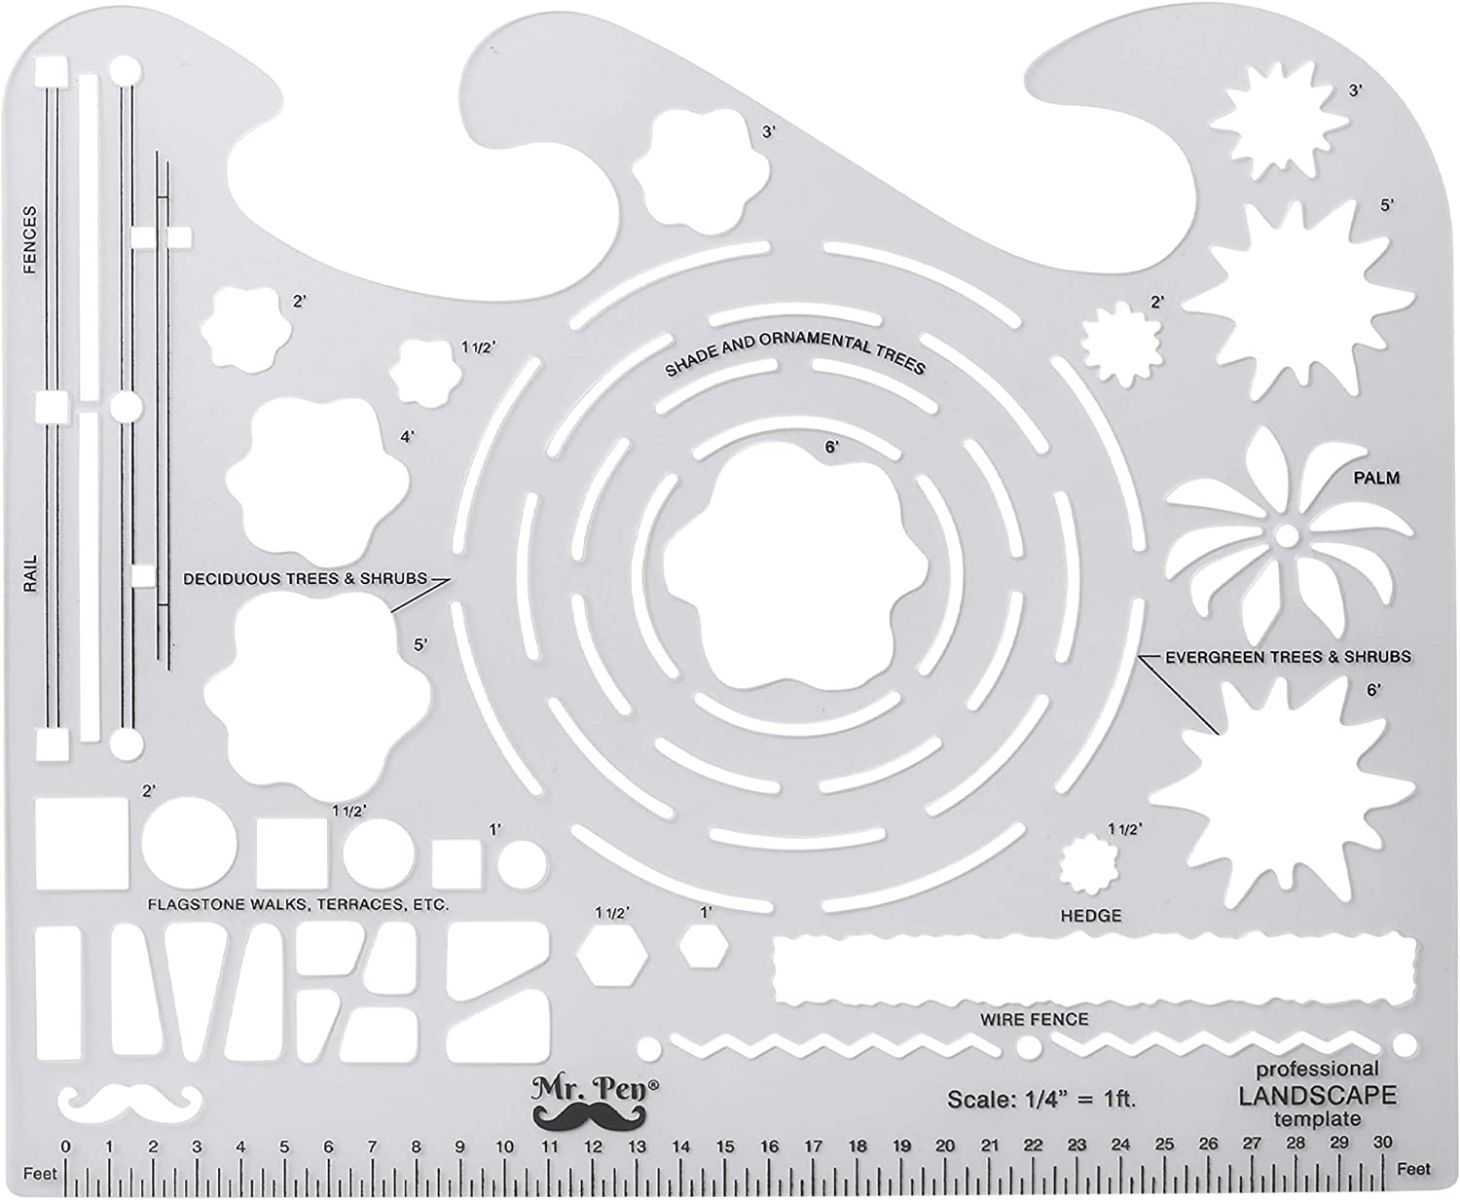 Landscape Templates, Architectural Templates, Drafting Tools, Landscaping Tools, Landscape Design Template, Drawing Template, Template Architecture, Drafting Ruler Shapes, Drawing Stencils